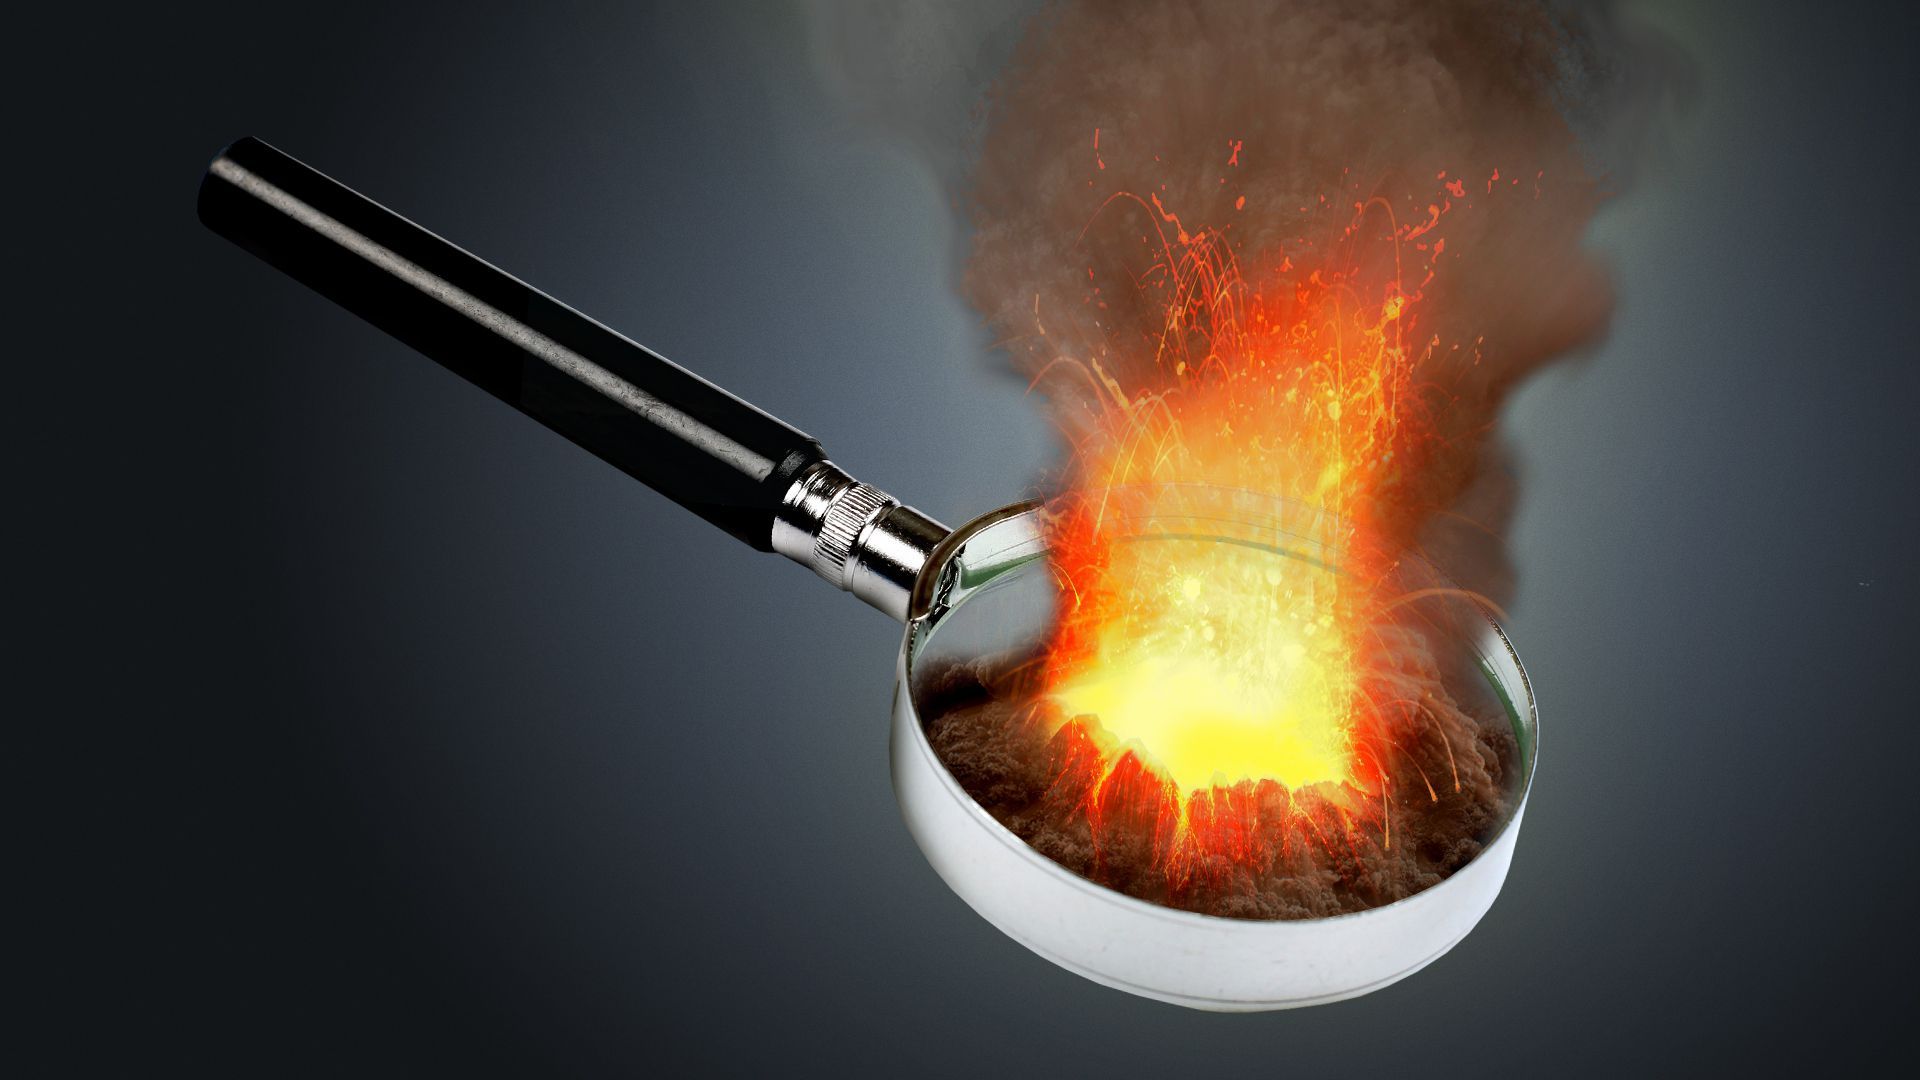 Illustration of a magnifying glass with an erupting volcano bursting from the glass